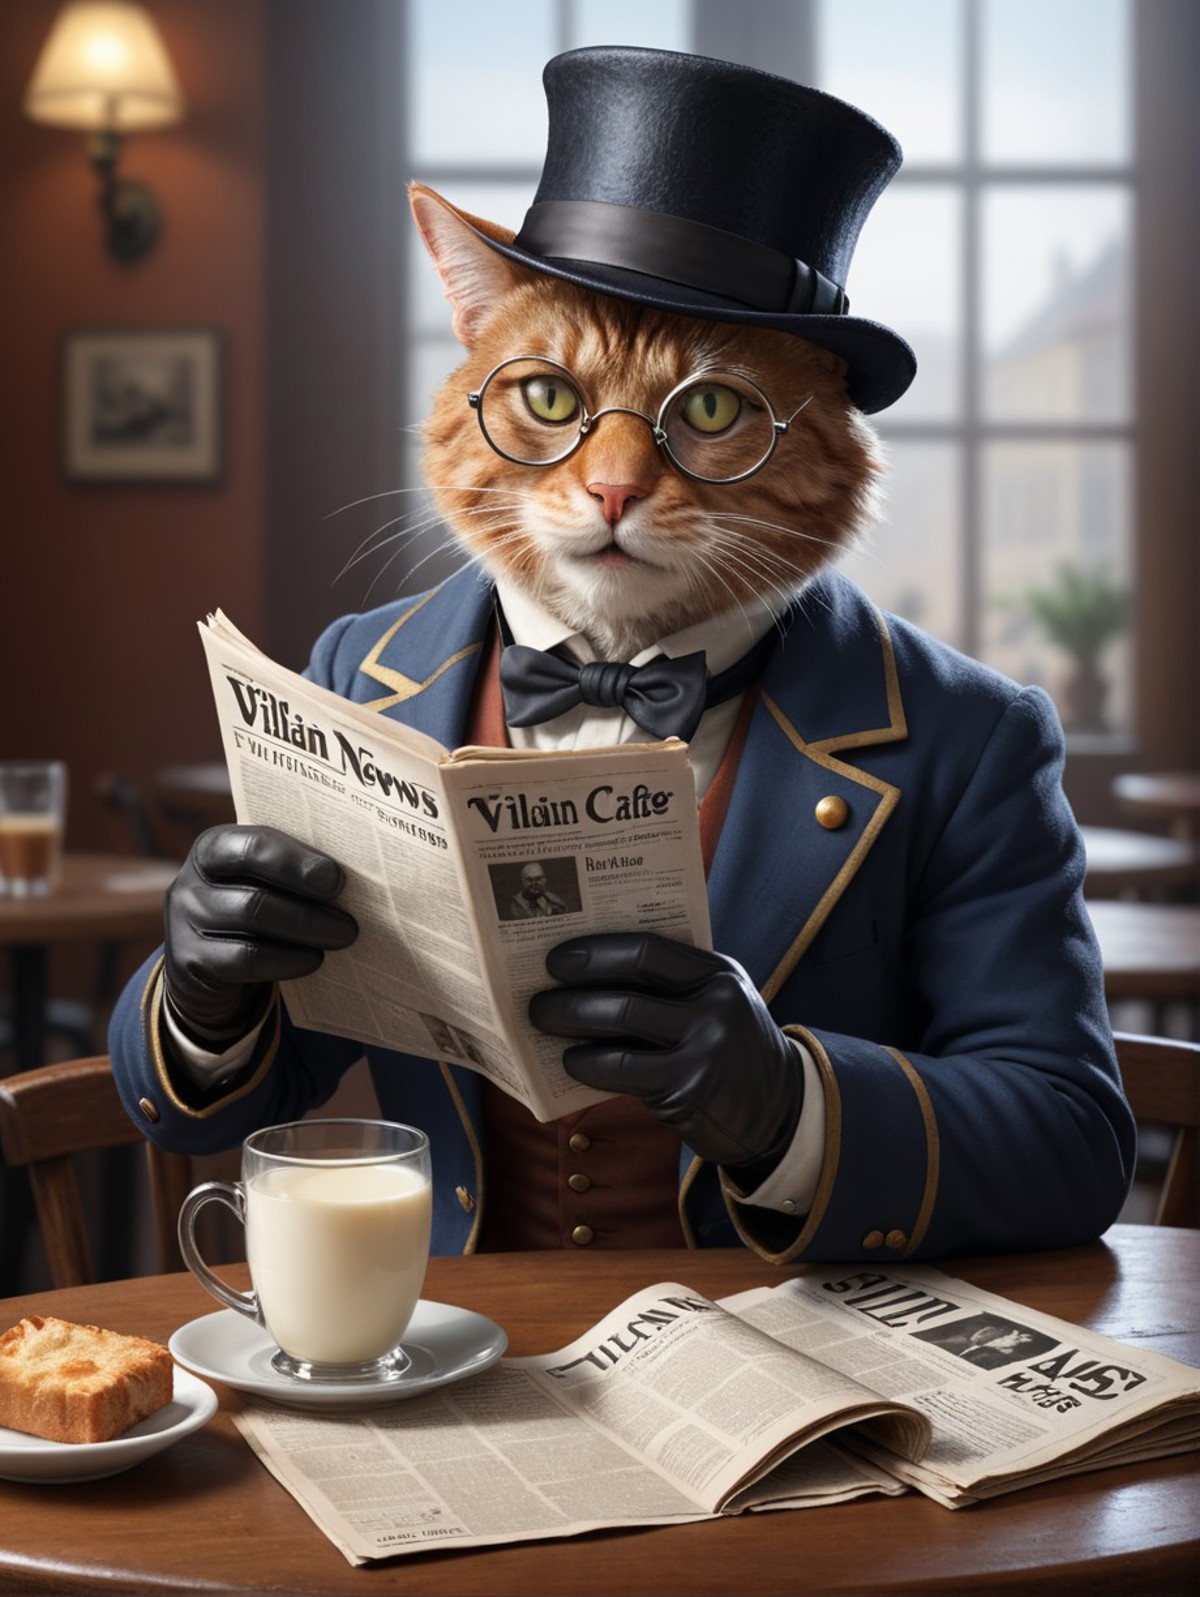 A cartoon cat dressed in a suit and hat is reading a newspaper.